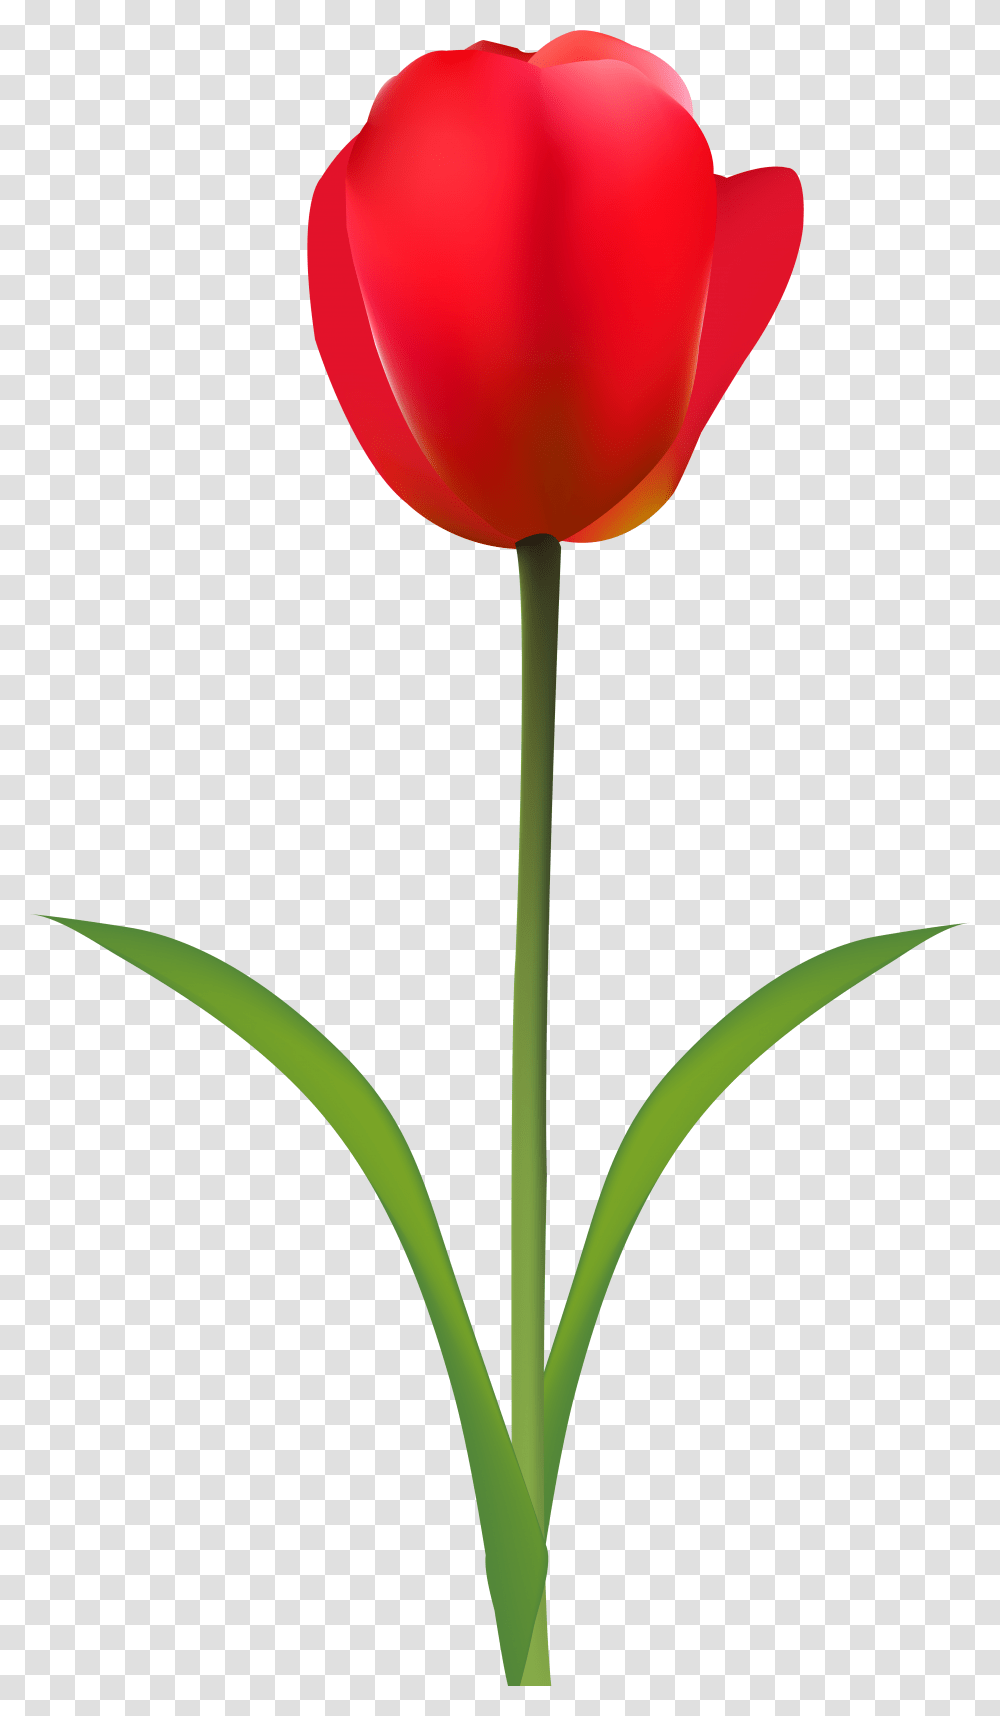 Library Of Flower Image Free Tulip Tulip, Plant, Blossom Transparent Png